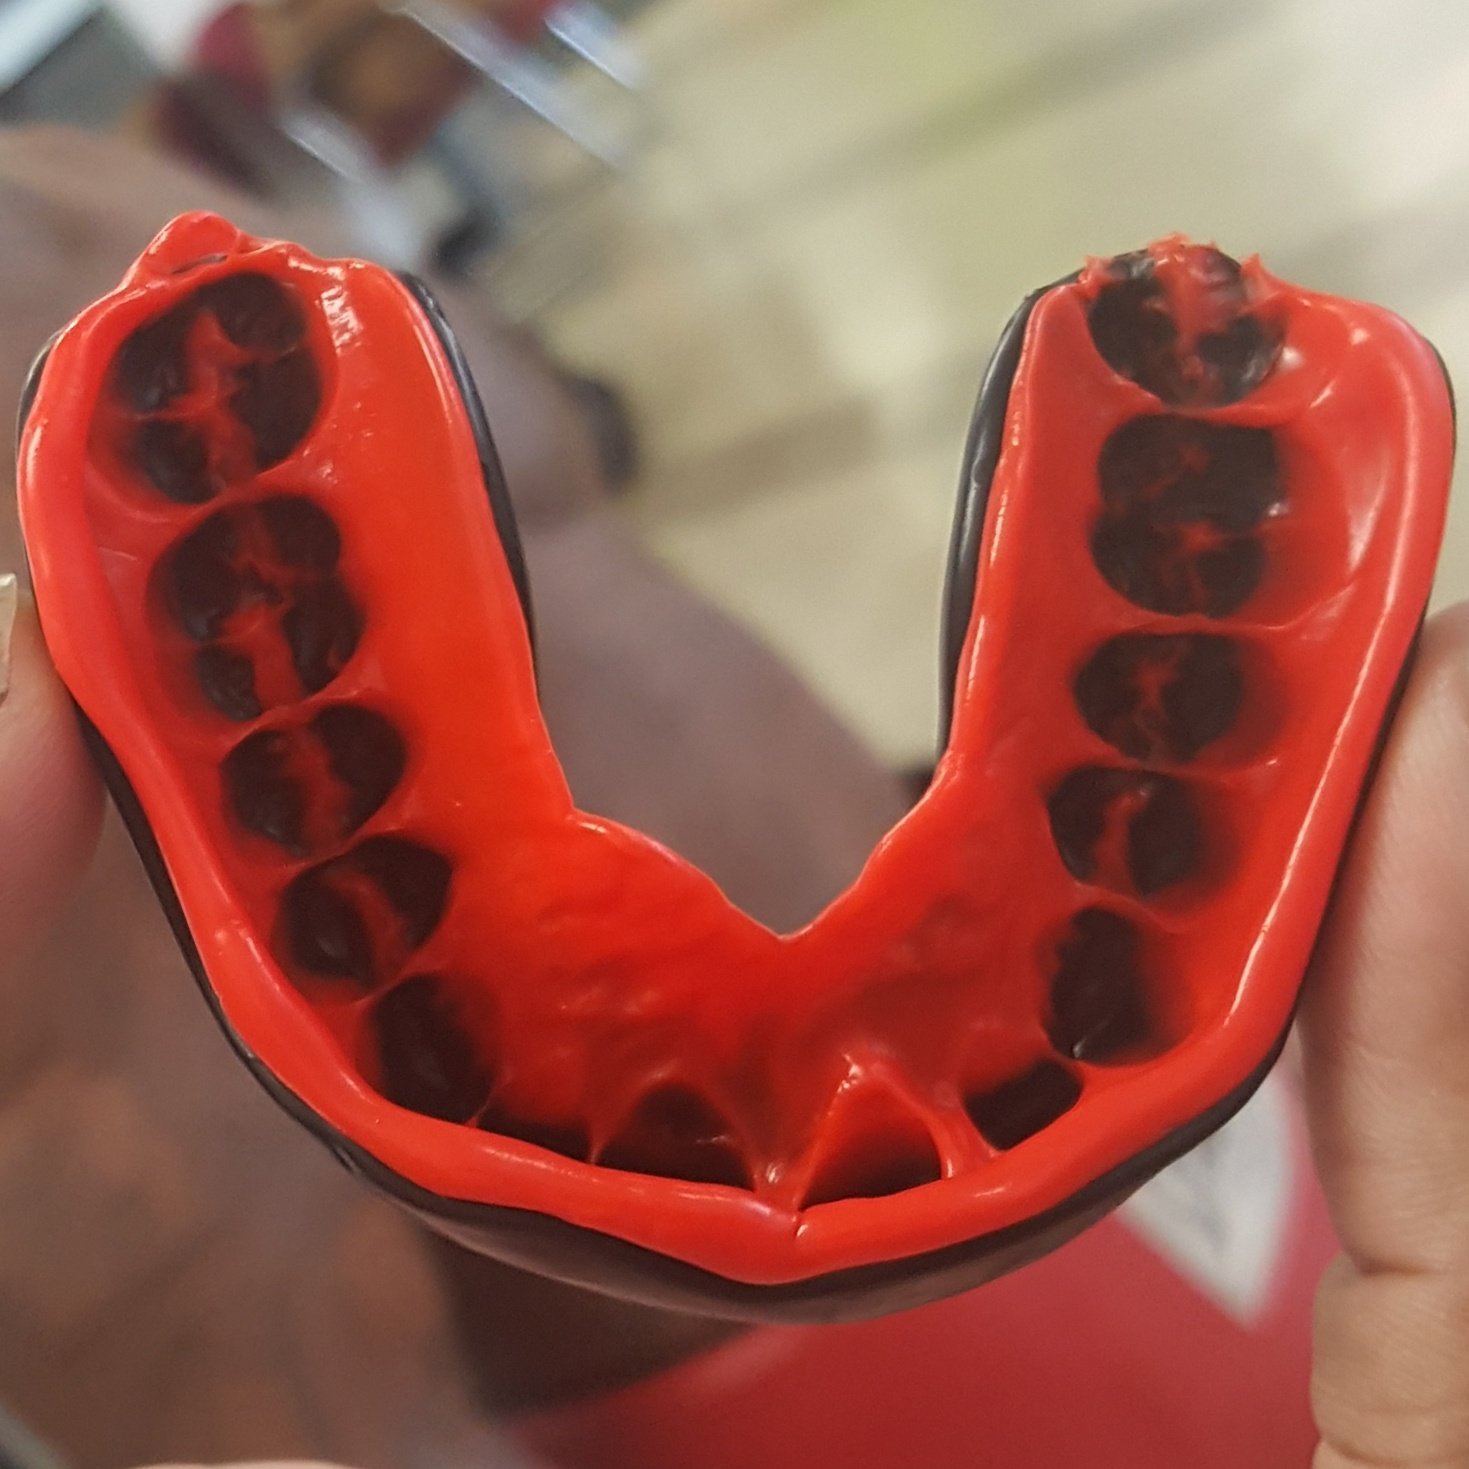 How to Mold a Mouth Guard - Step-by-Step Mouthguard Fitting Guide